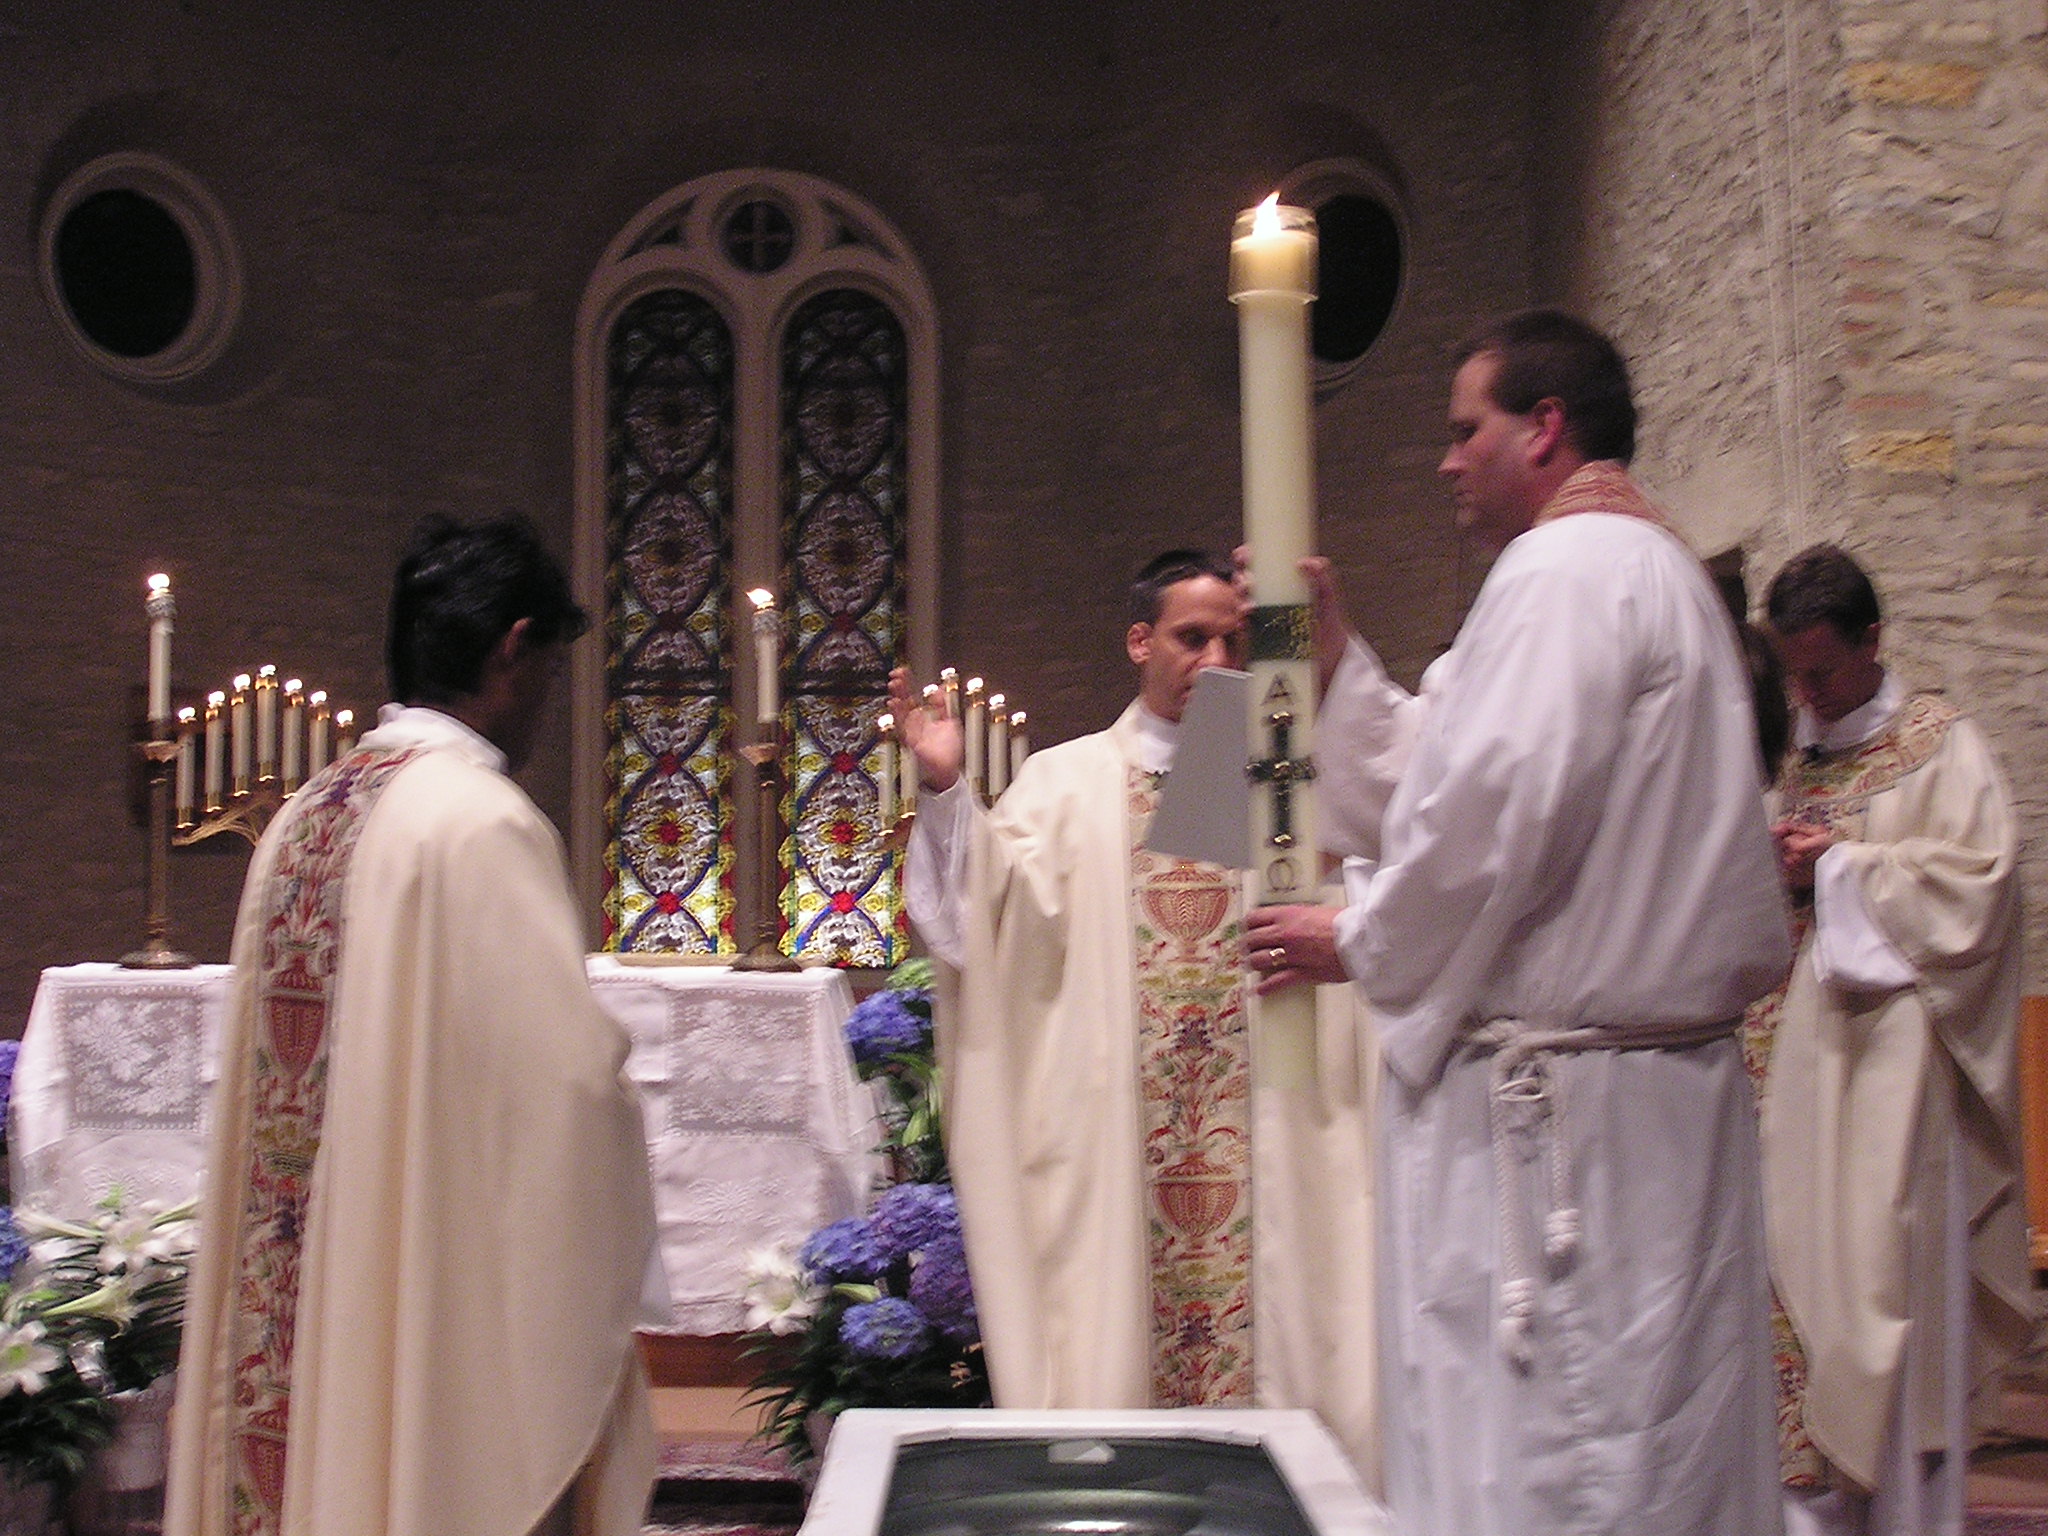 a priest is ordained with people dressed in white